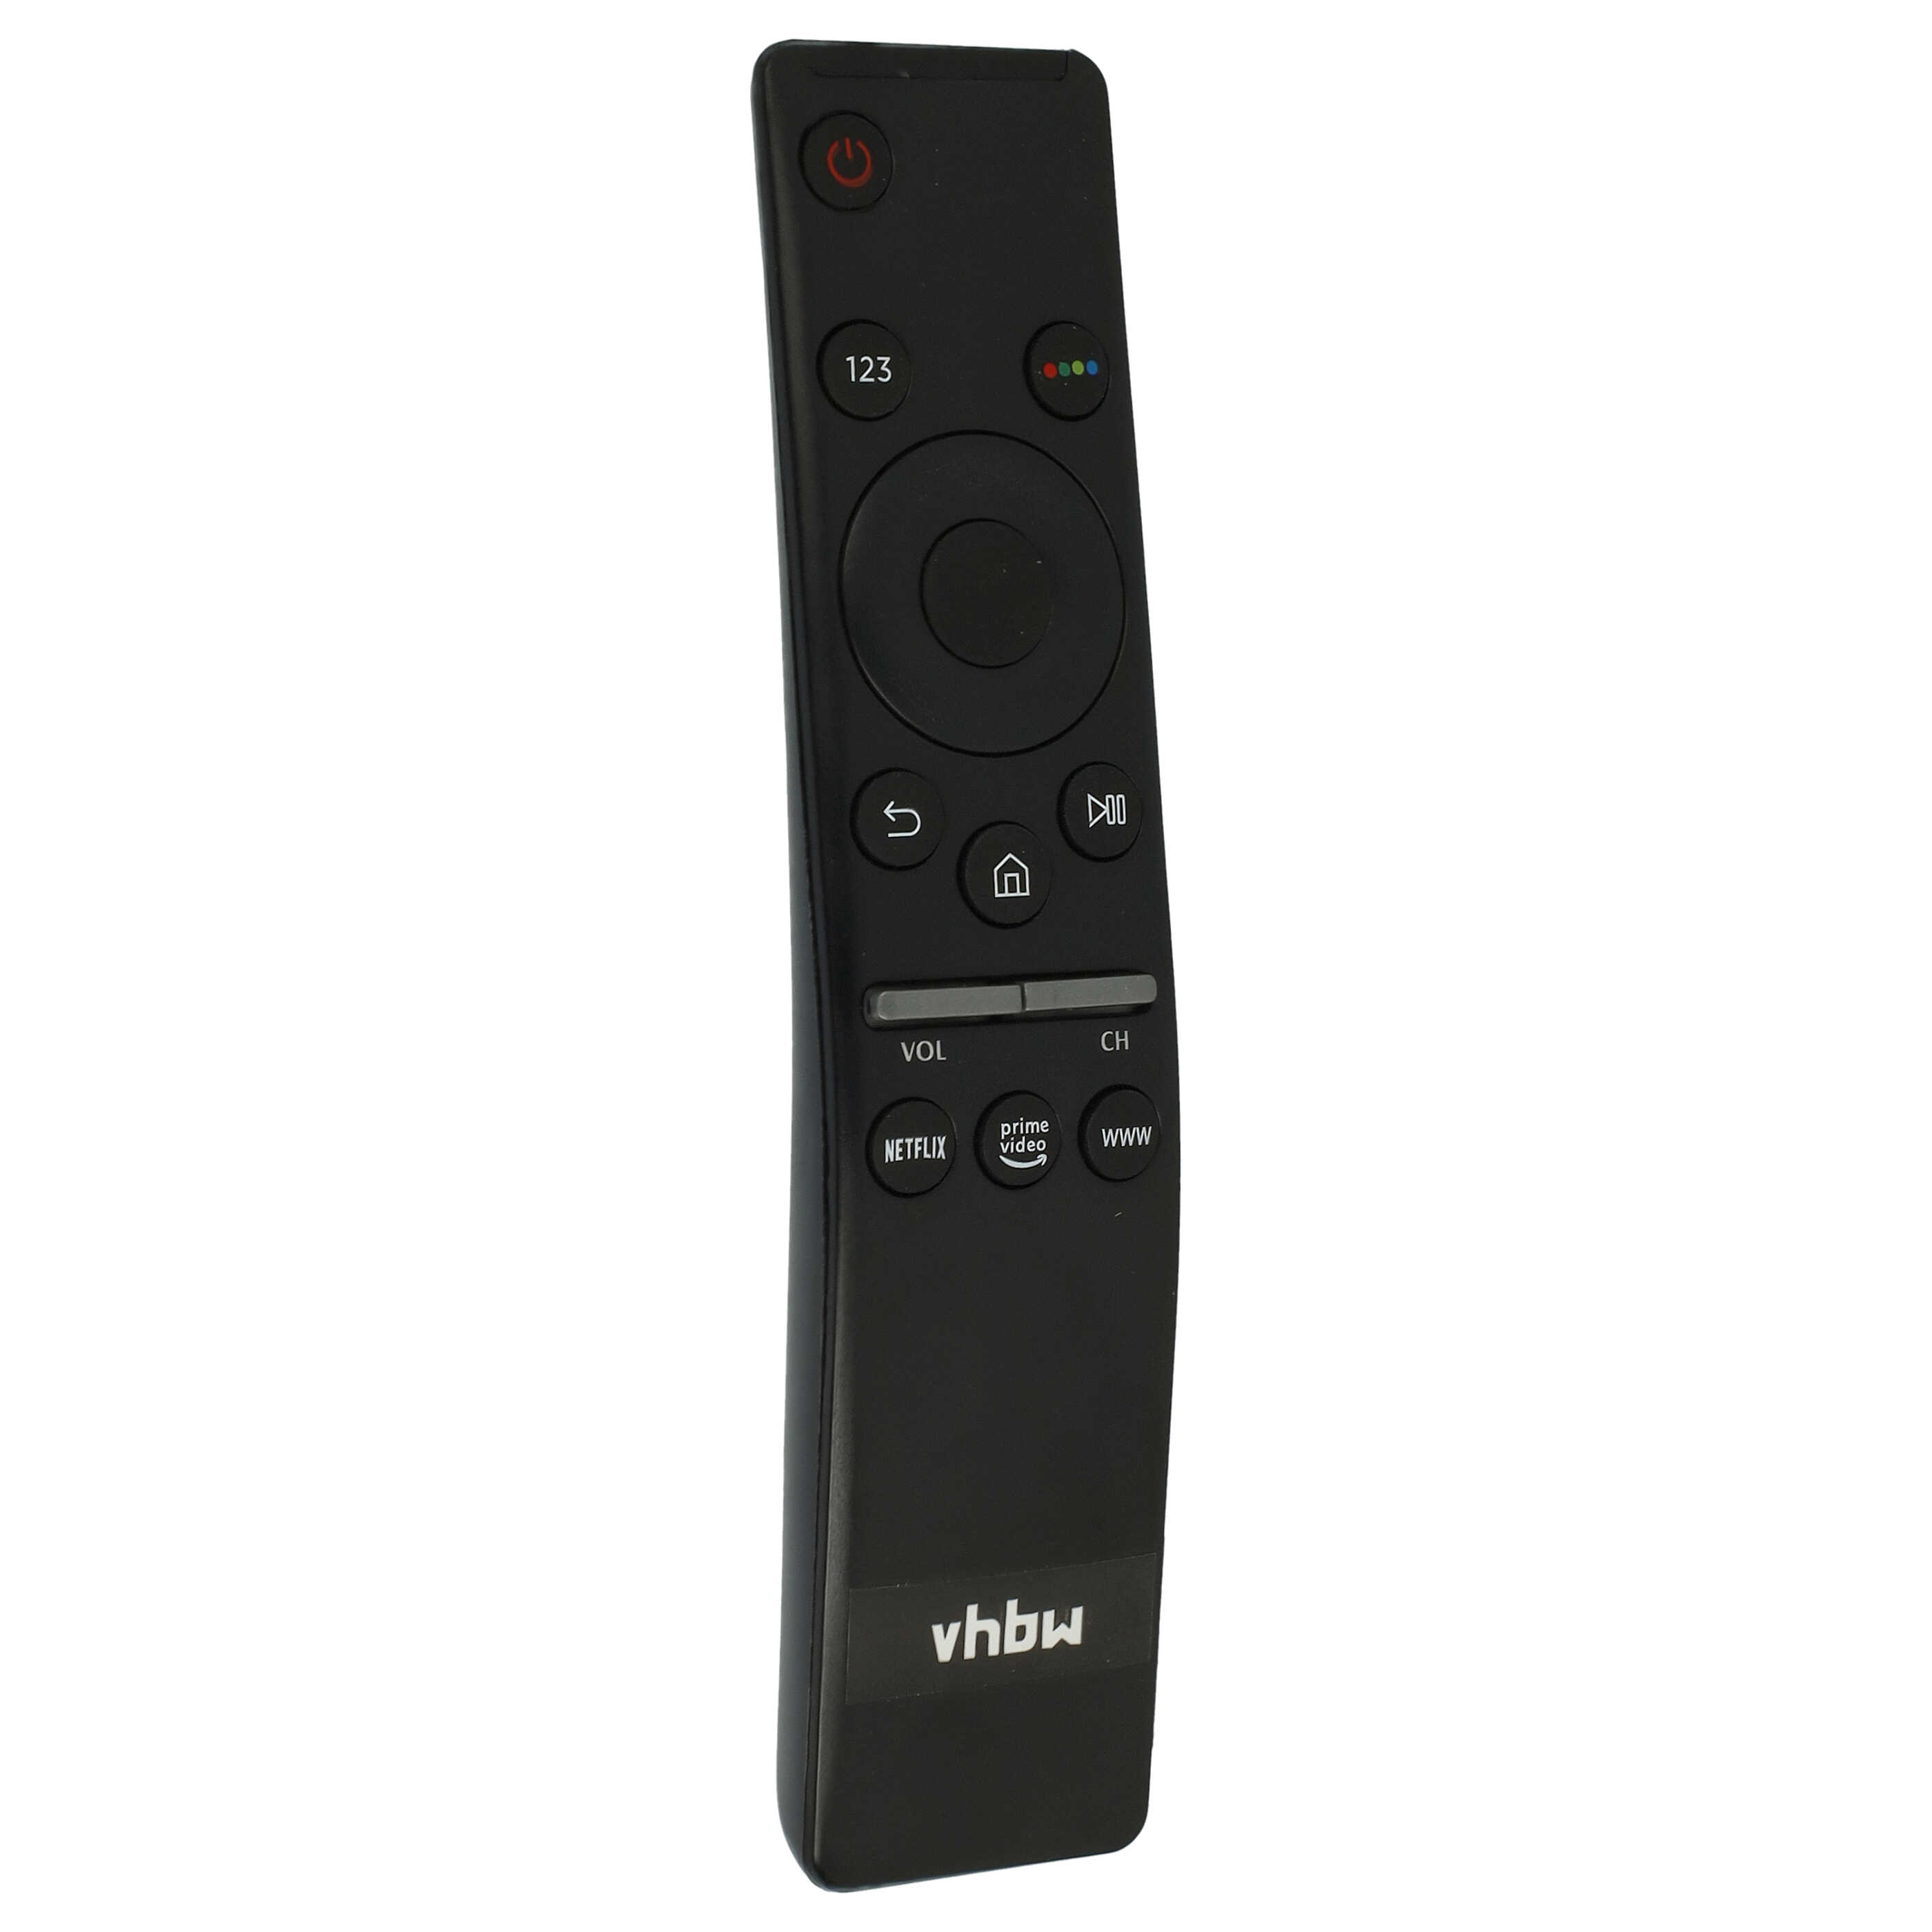 Remote Control replaces Samsung BN59-01310A for Samsung TV